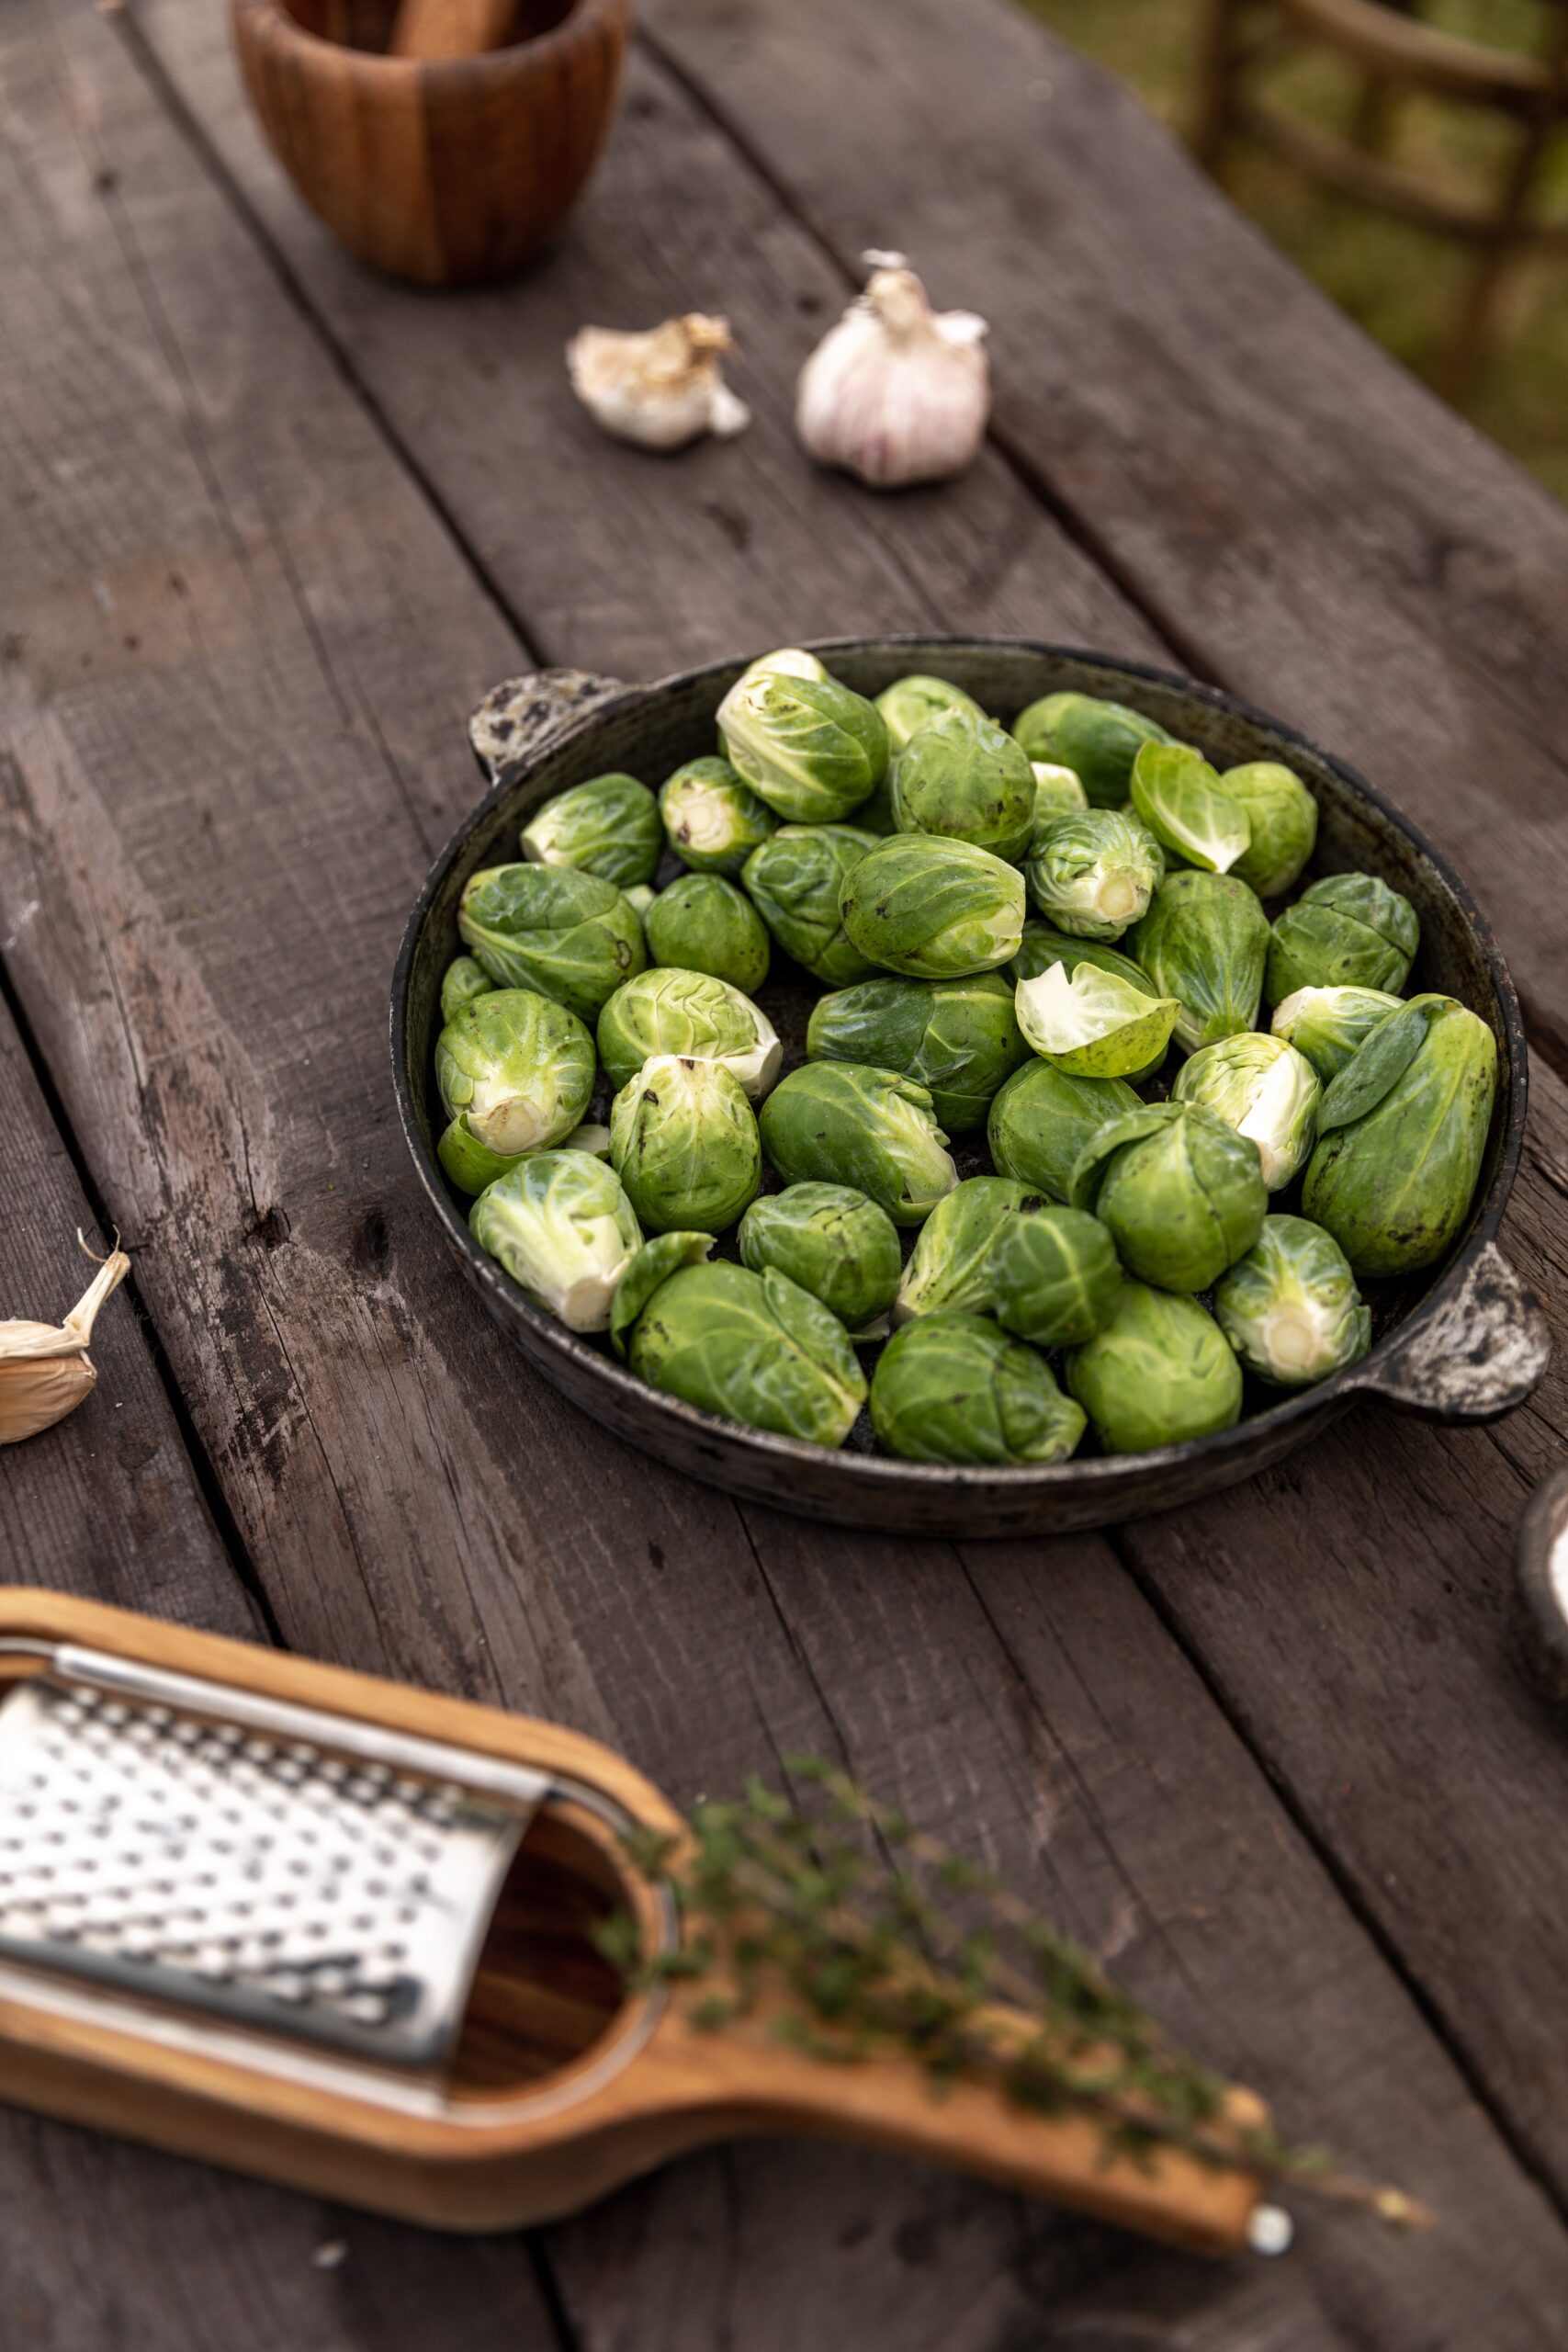 Why do Brussel Sprouts make you fart?